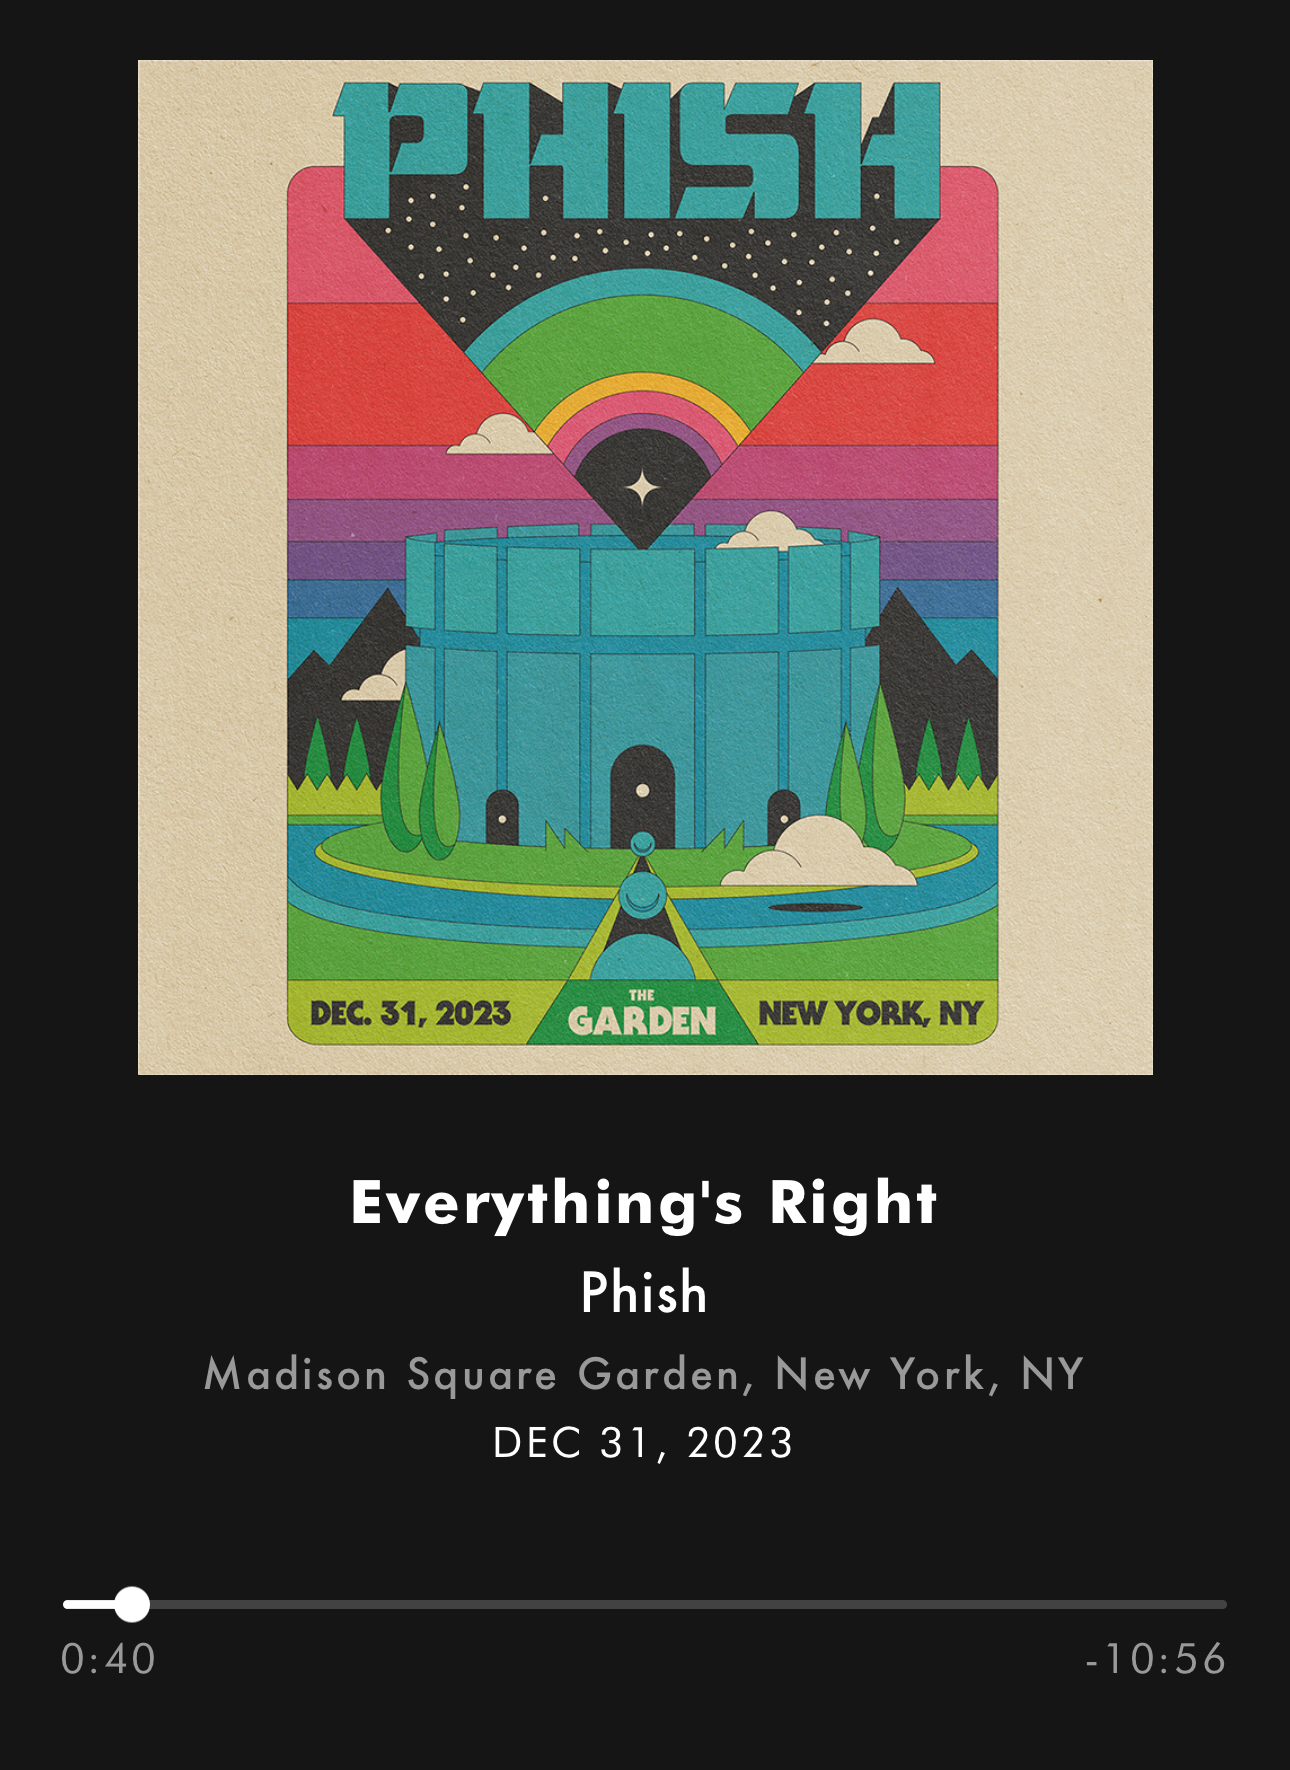 The image is a stylized concert poster for the band Phish, depicting a retro graphic design with the band’s name at the top in large block letters, colorful stripes and a rainbow emerging from a central triangular prism. 12/31/23 MSG